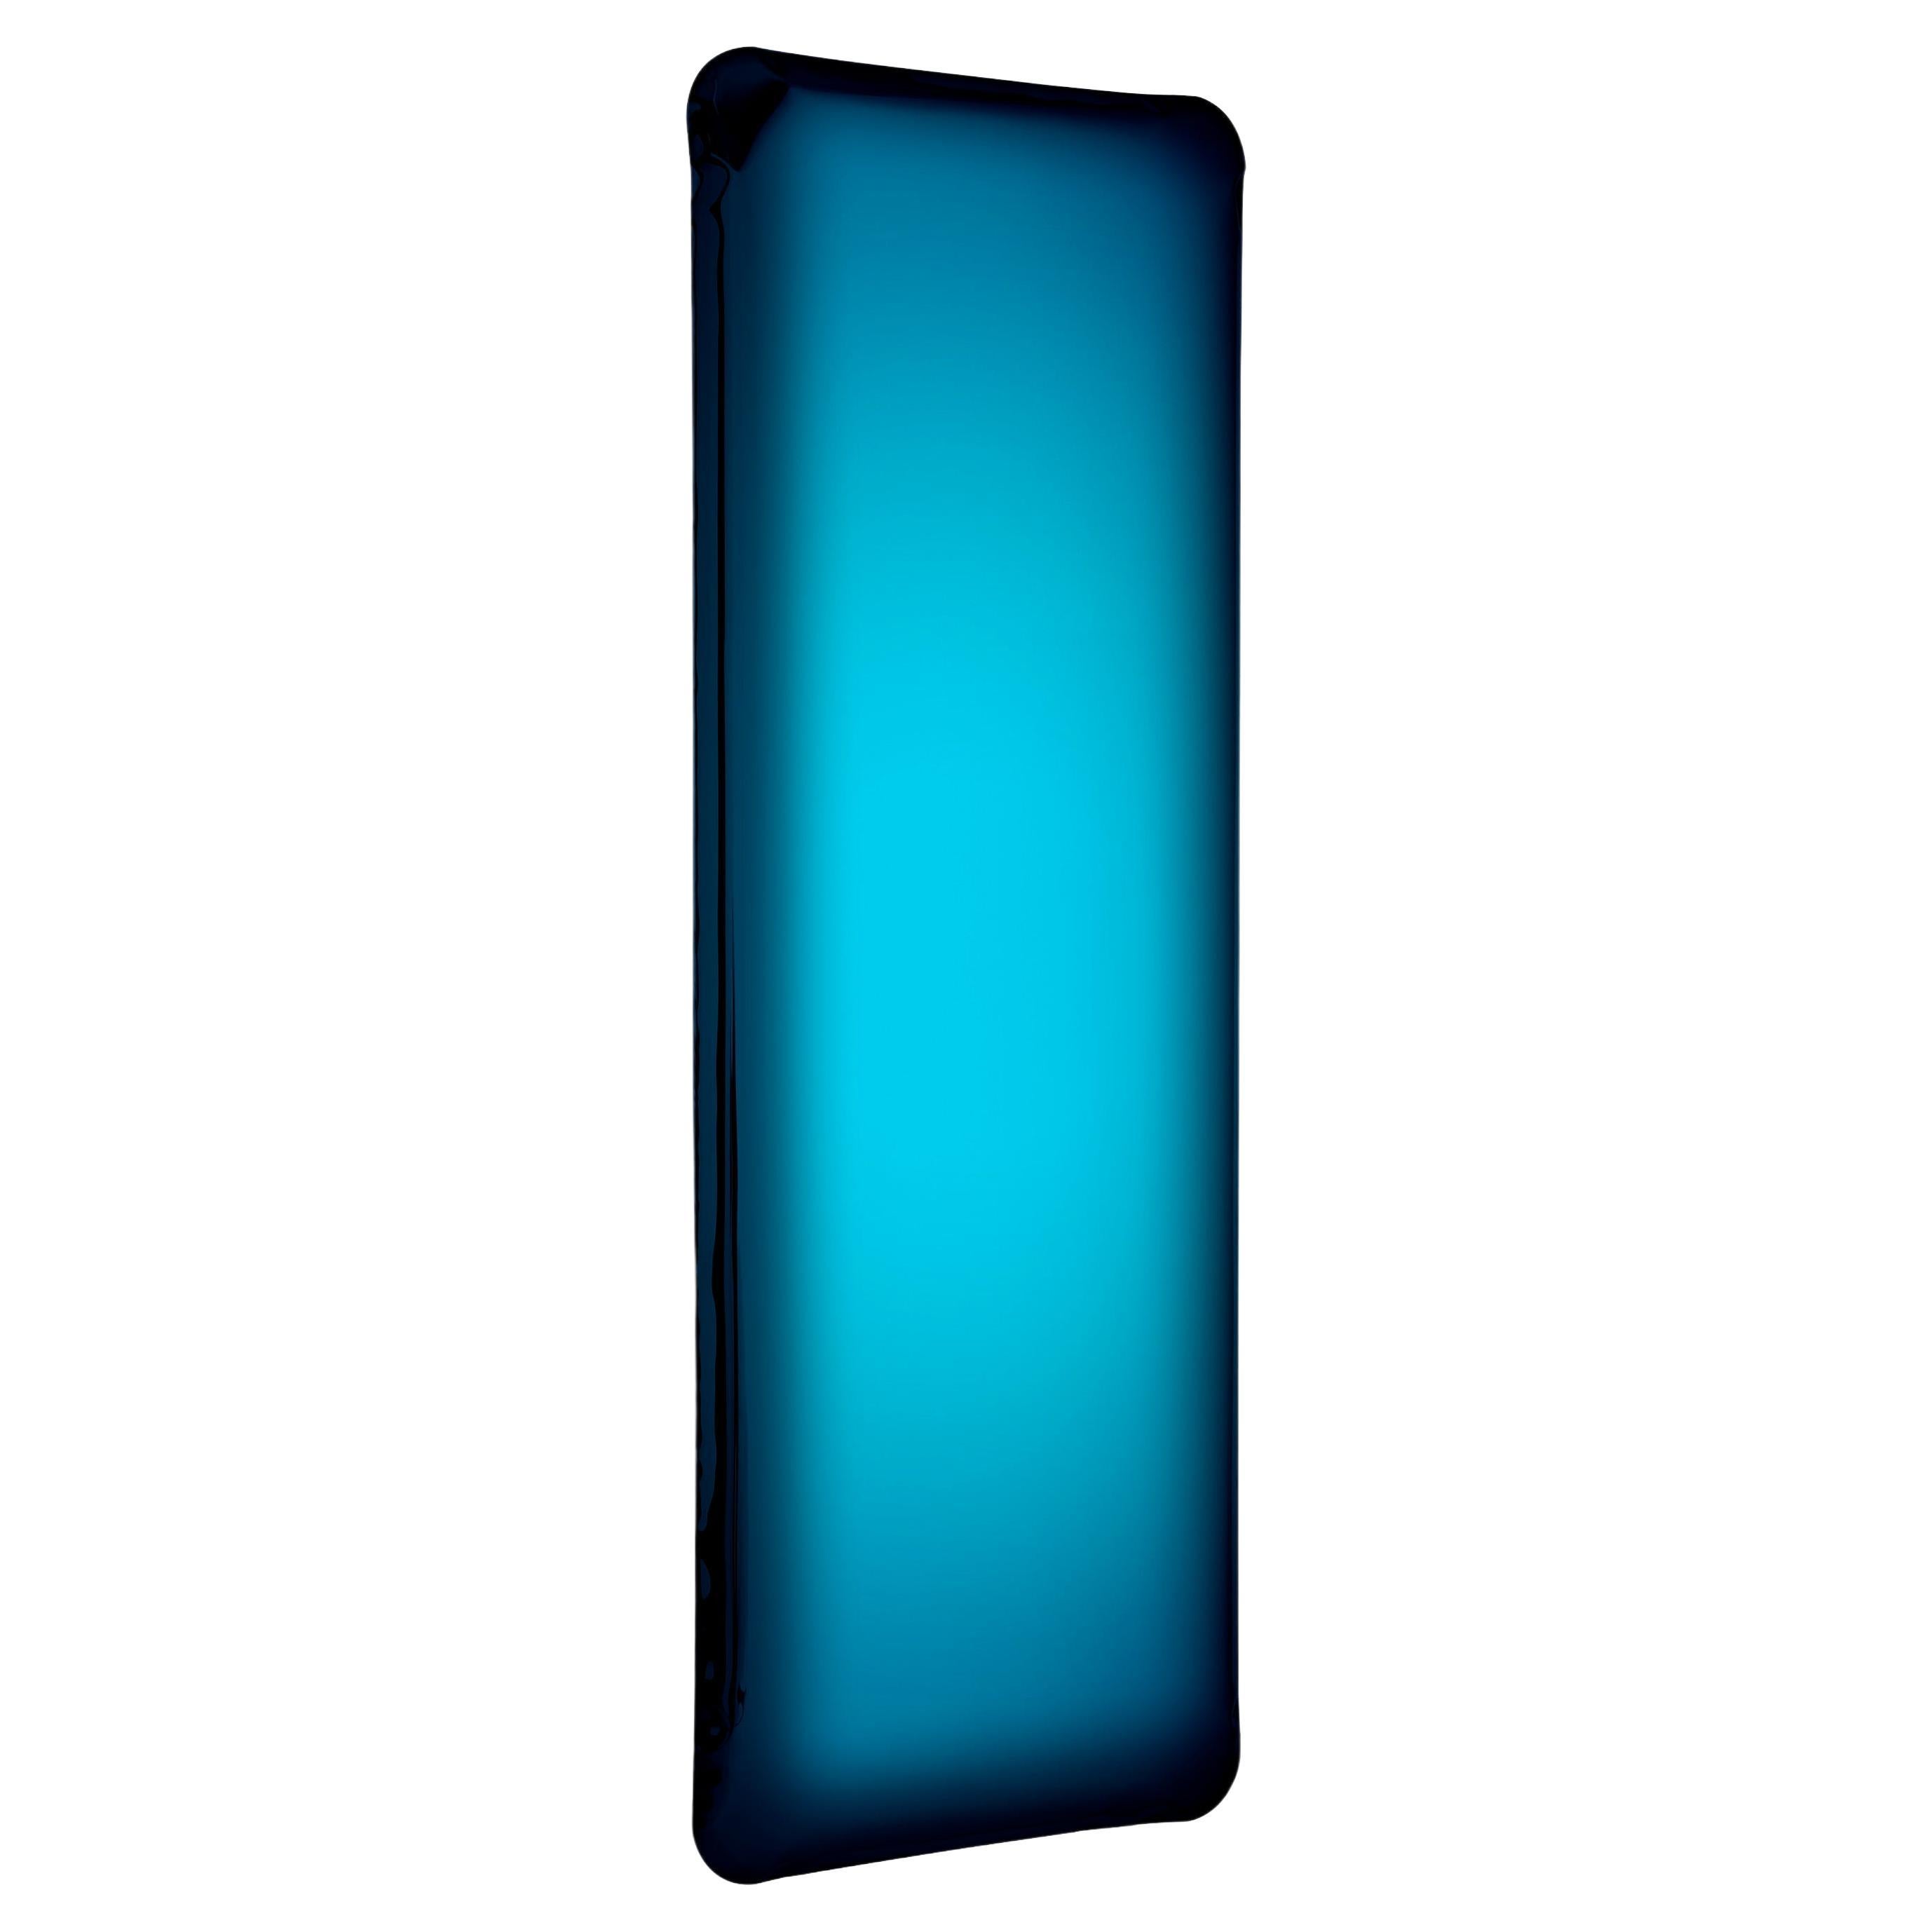 Tafla Q1 Polished Deep Space Blue Color Stainless Steel Wall Mirror by Zieta For Sale